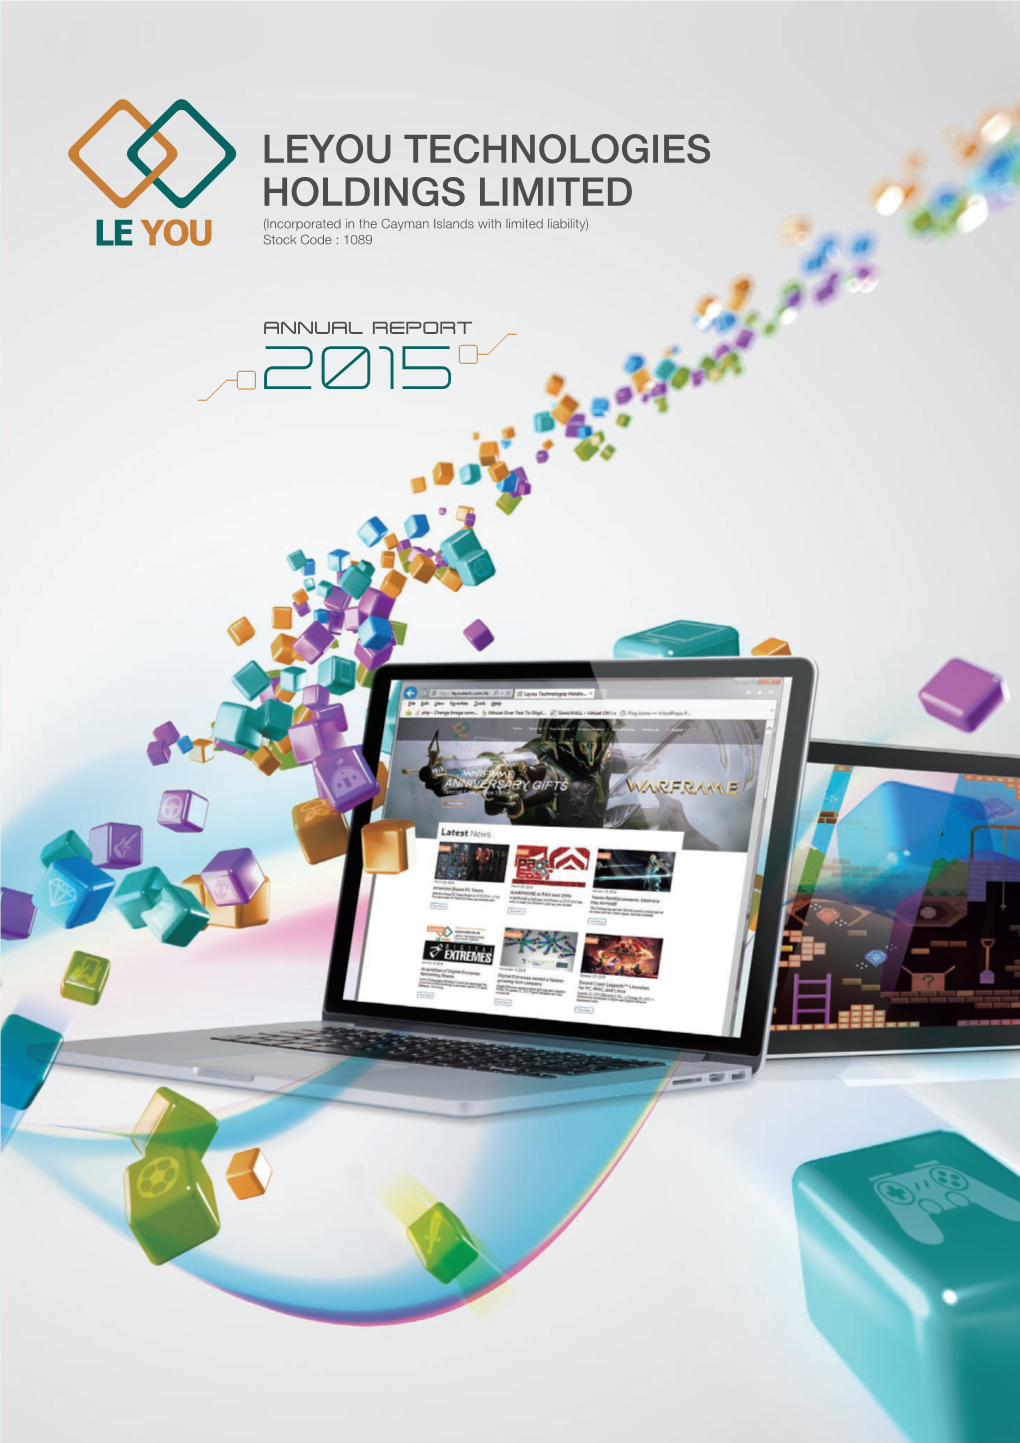 LEYOU TECHNOLOGIES HOLDINGS LIMITED Annual Report 2015